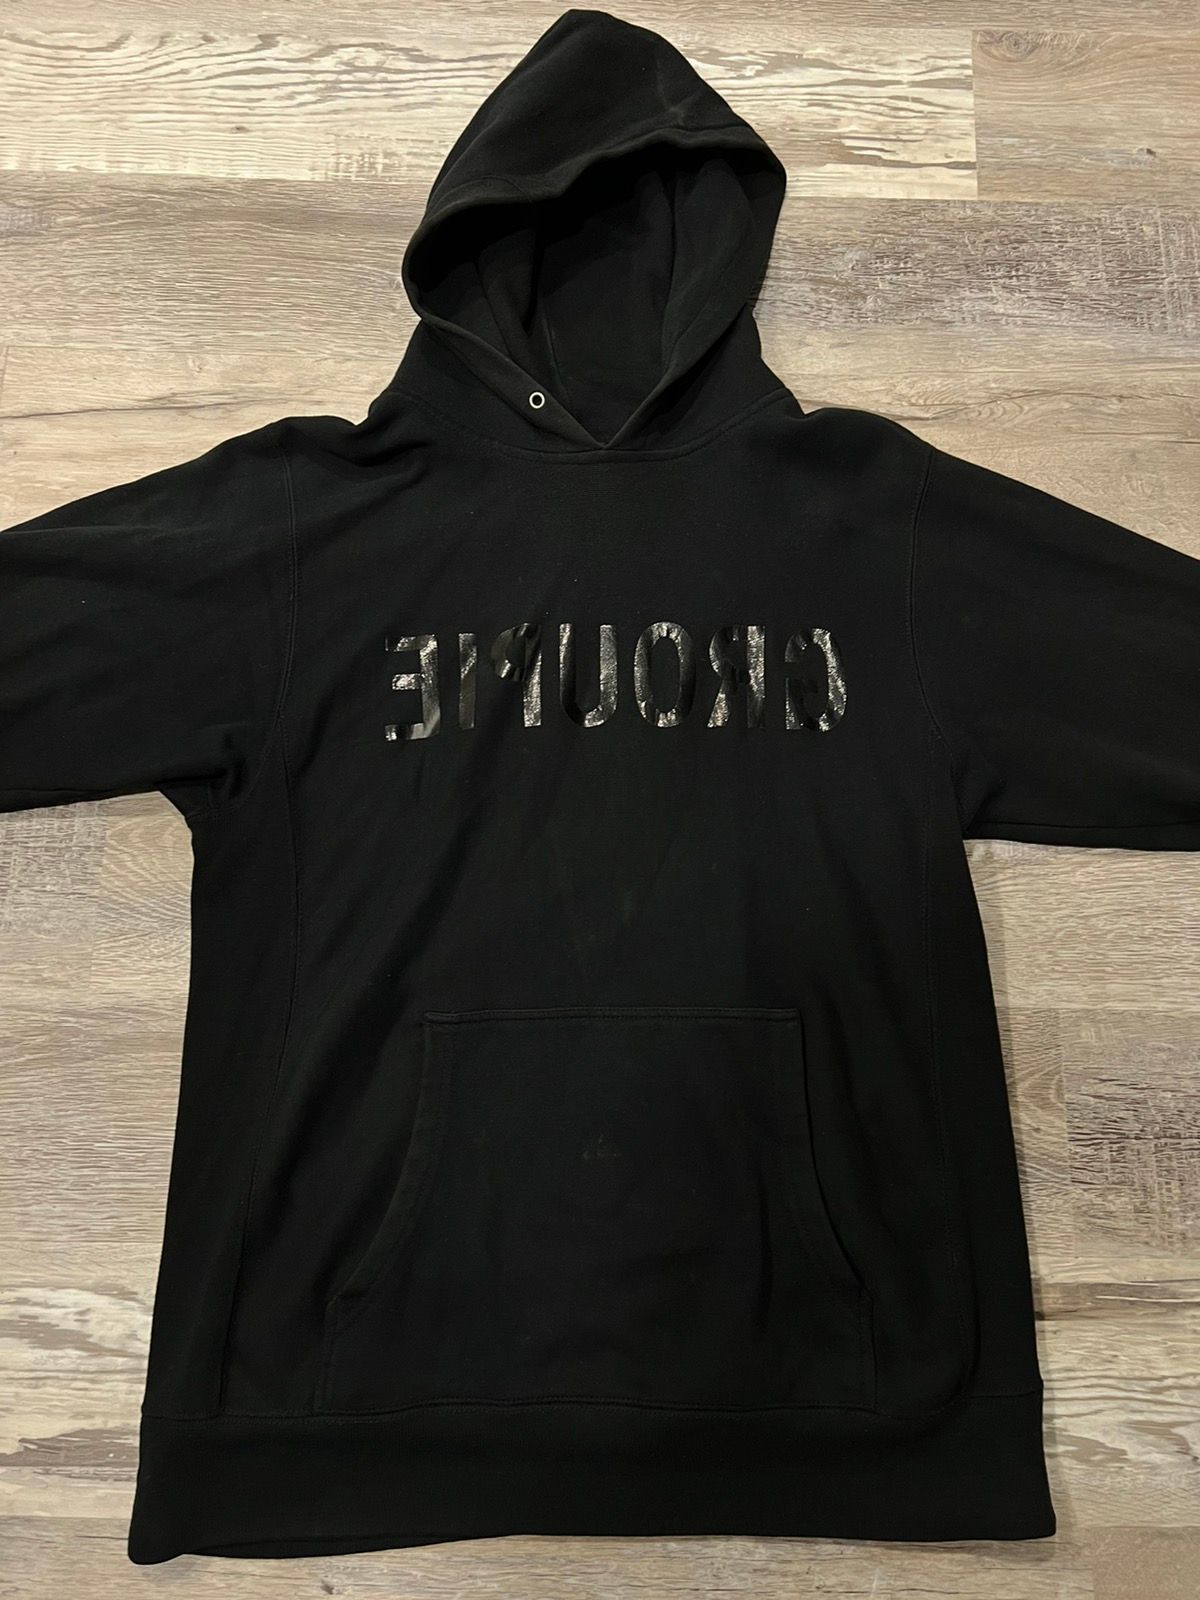 Undercover Undercover Groupie Hoodie Size US L / EU 52-54 / 3 - 1 Preview